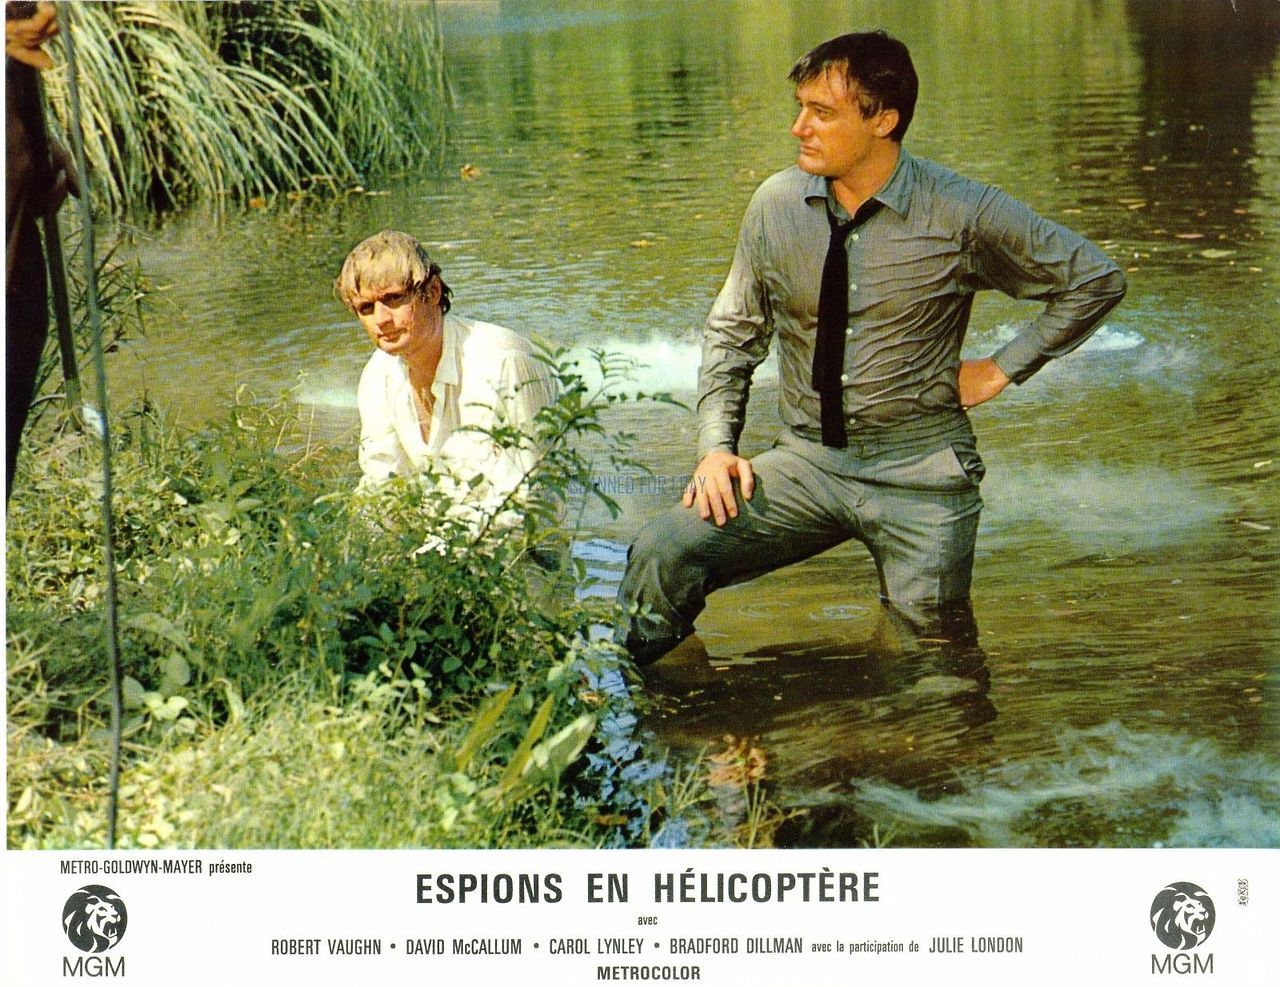 The Helicopter Spies (1968) Screenshot 3 